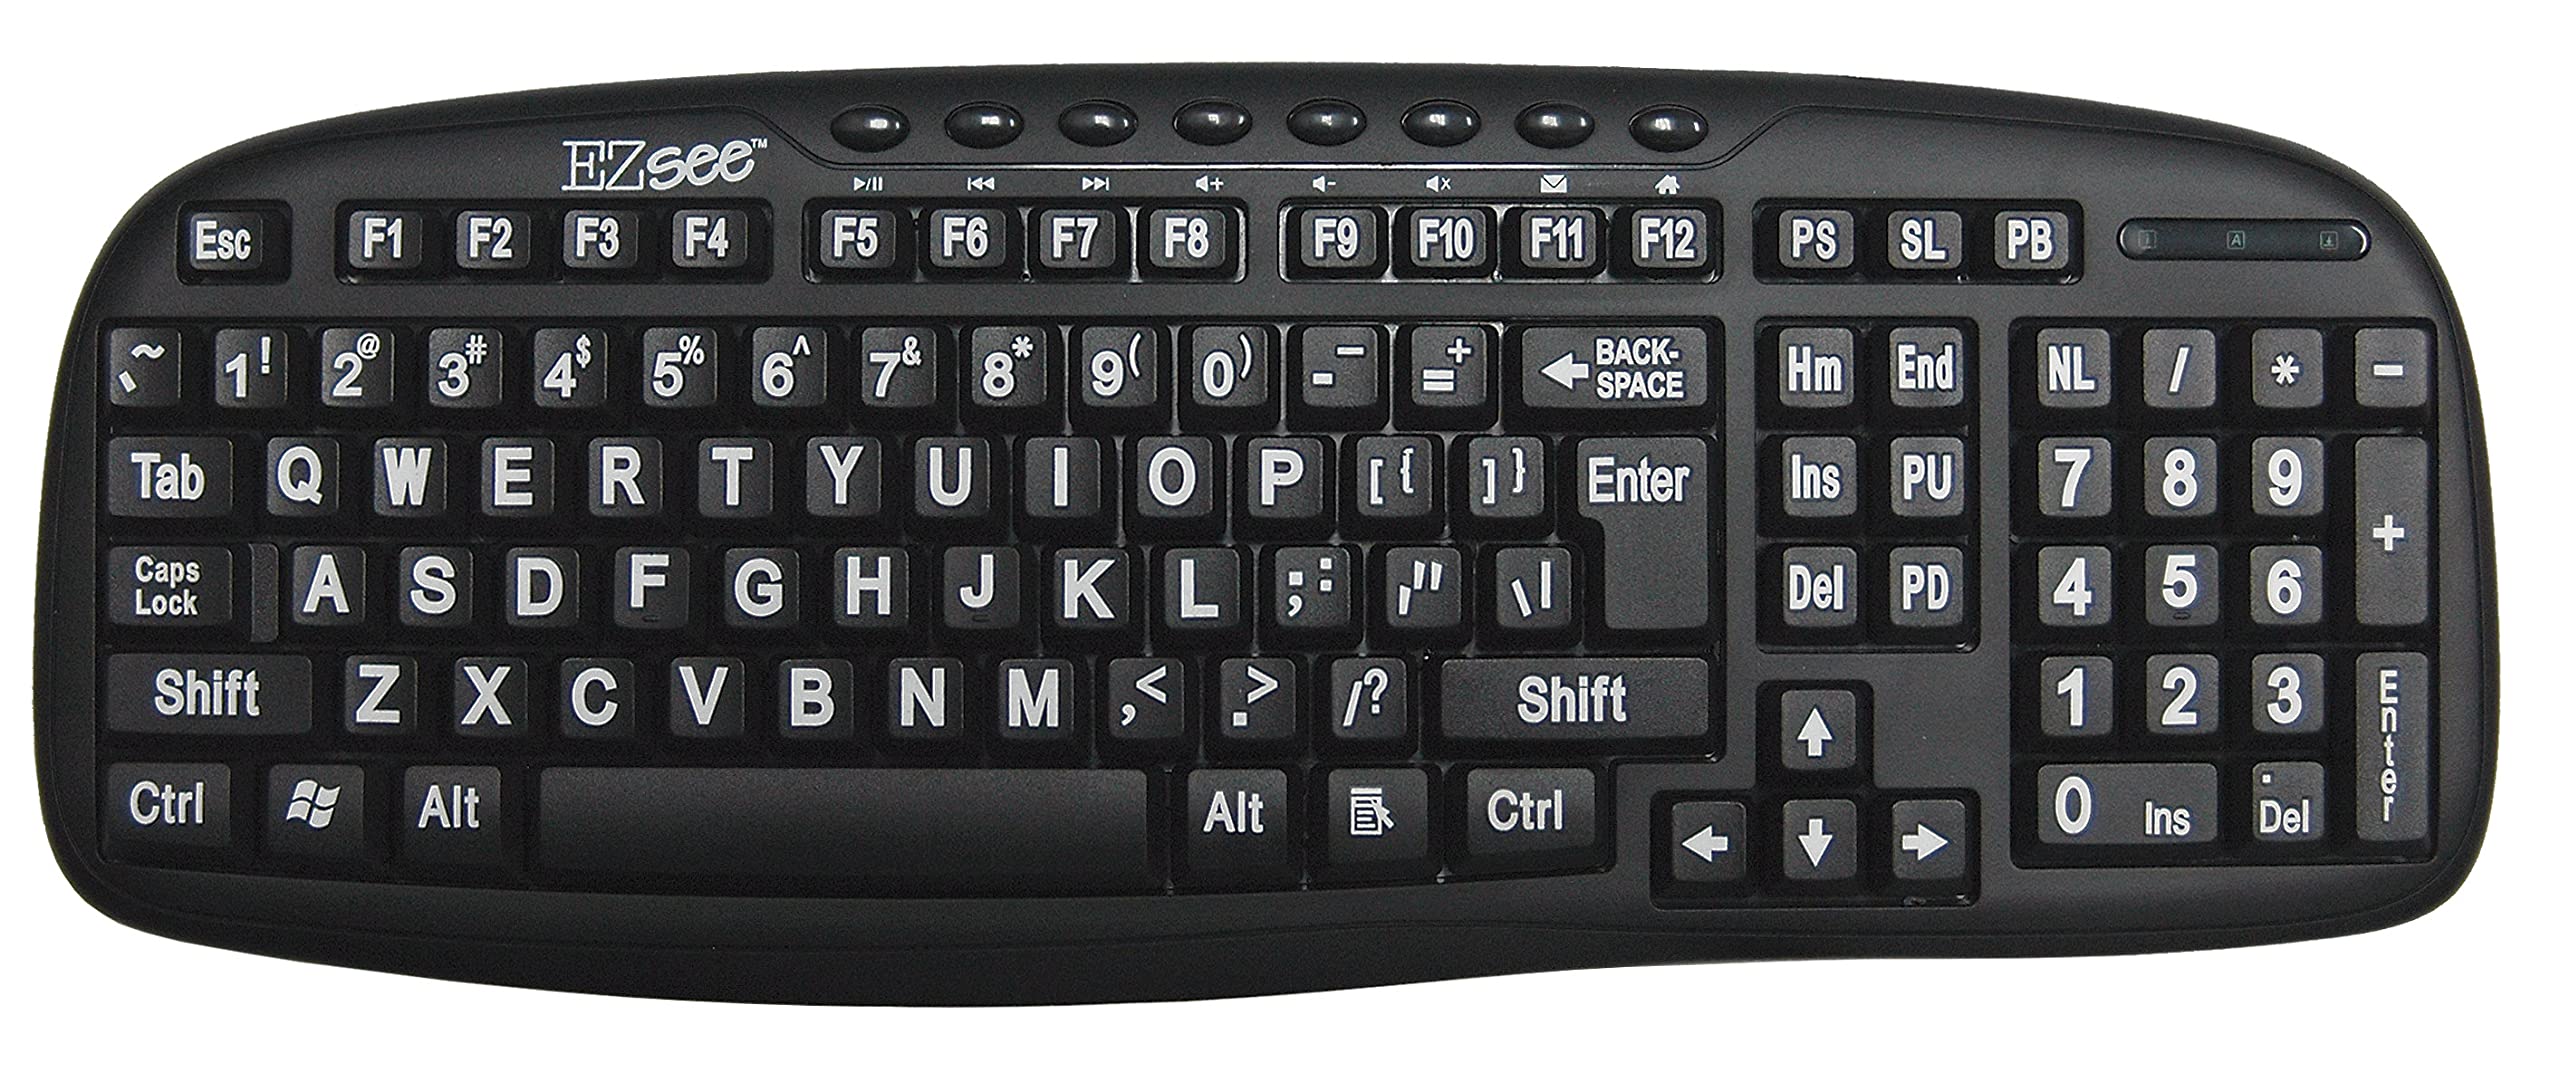 USB and wireless keyboard with a question mark symbol